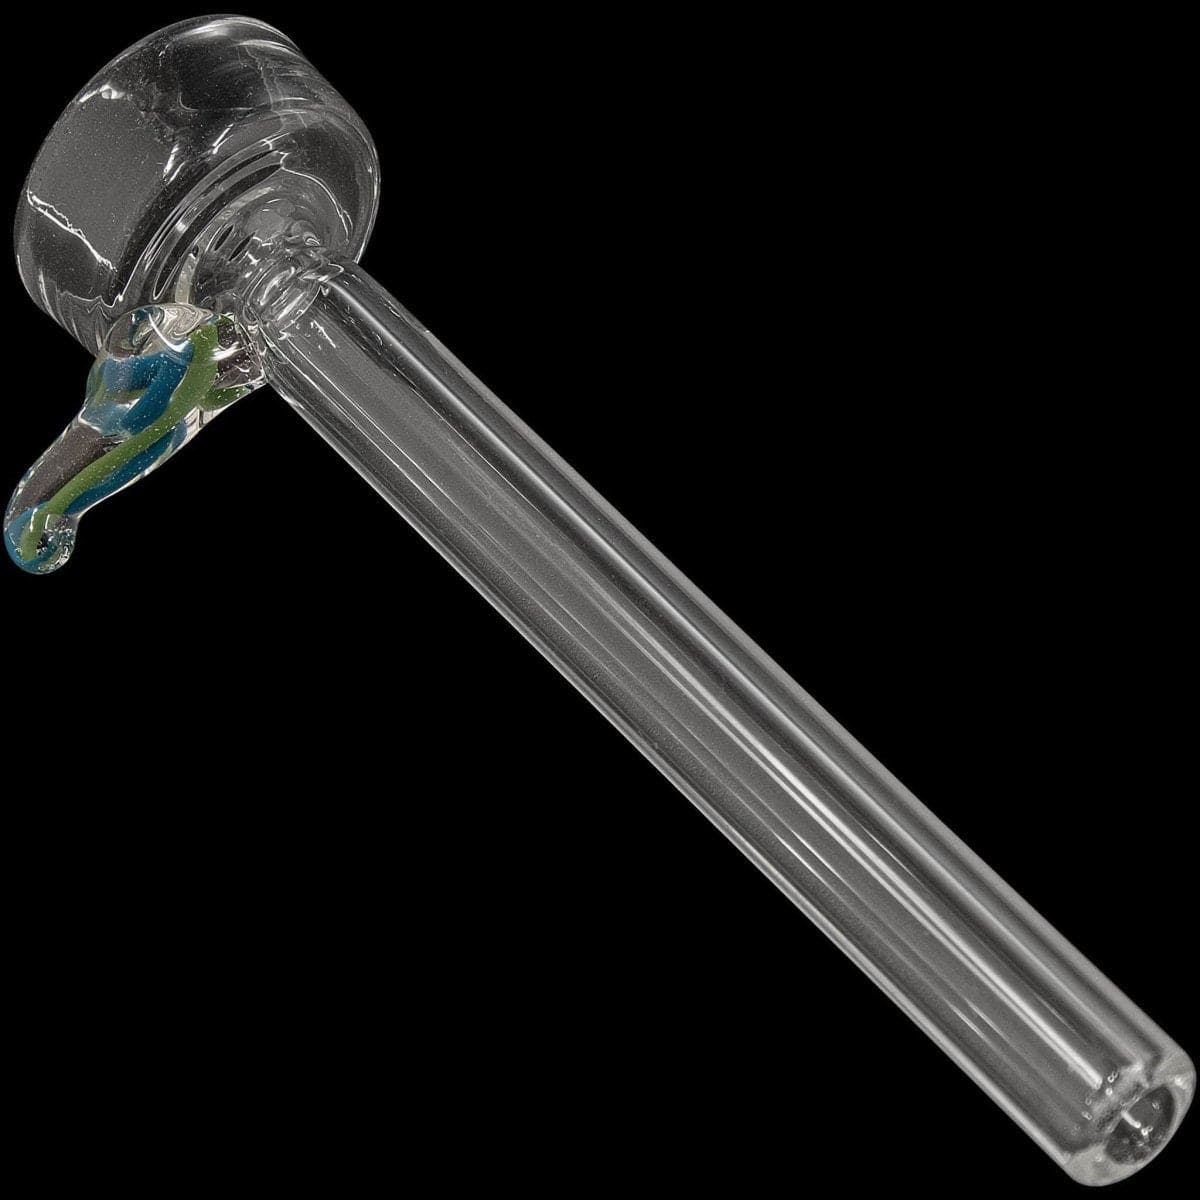 LA Pipes Smoking Accessory 9mm Clear Slide Bowl w/ Color Handle for Pull-Stem Bongs